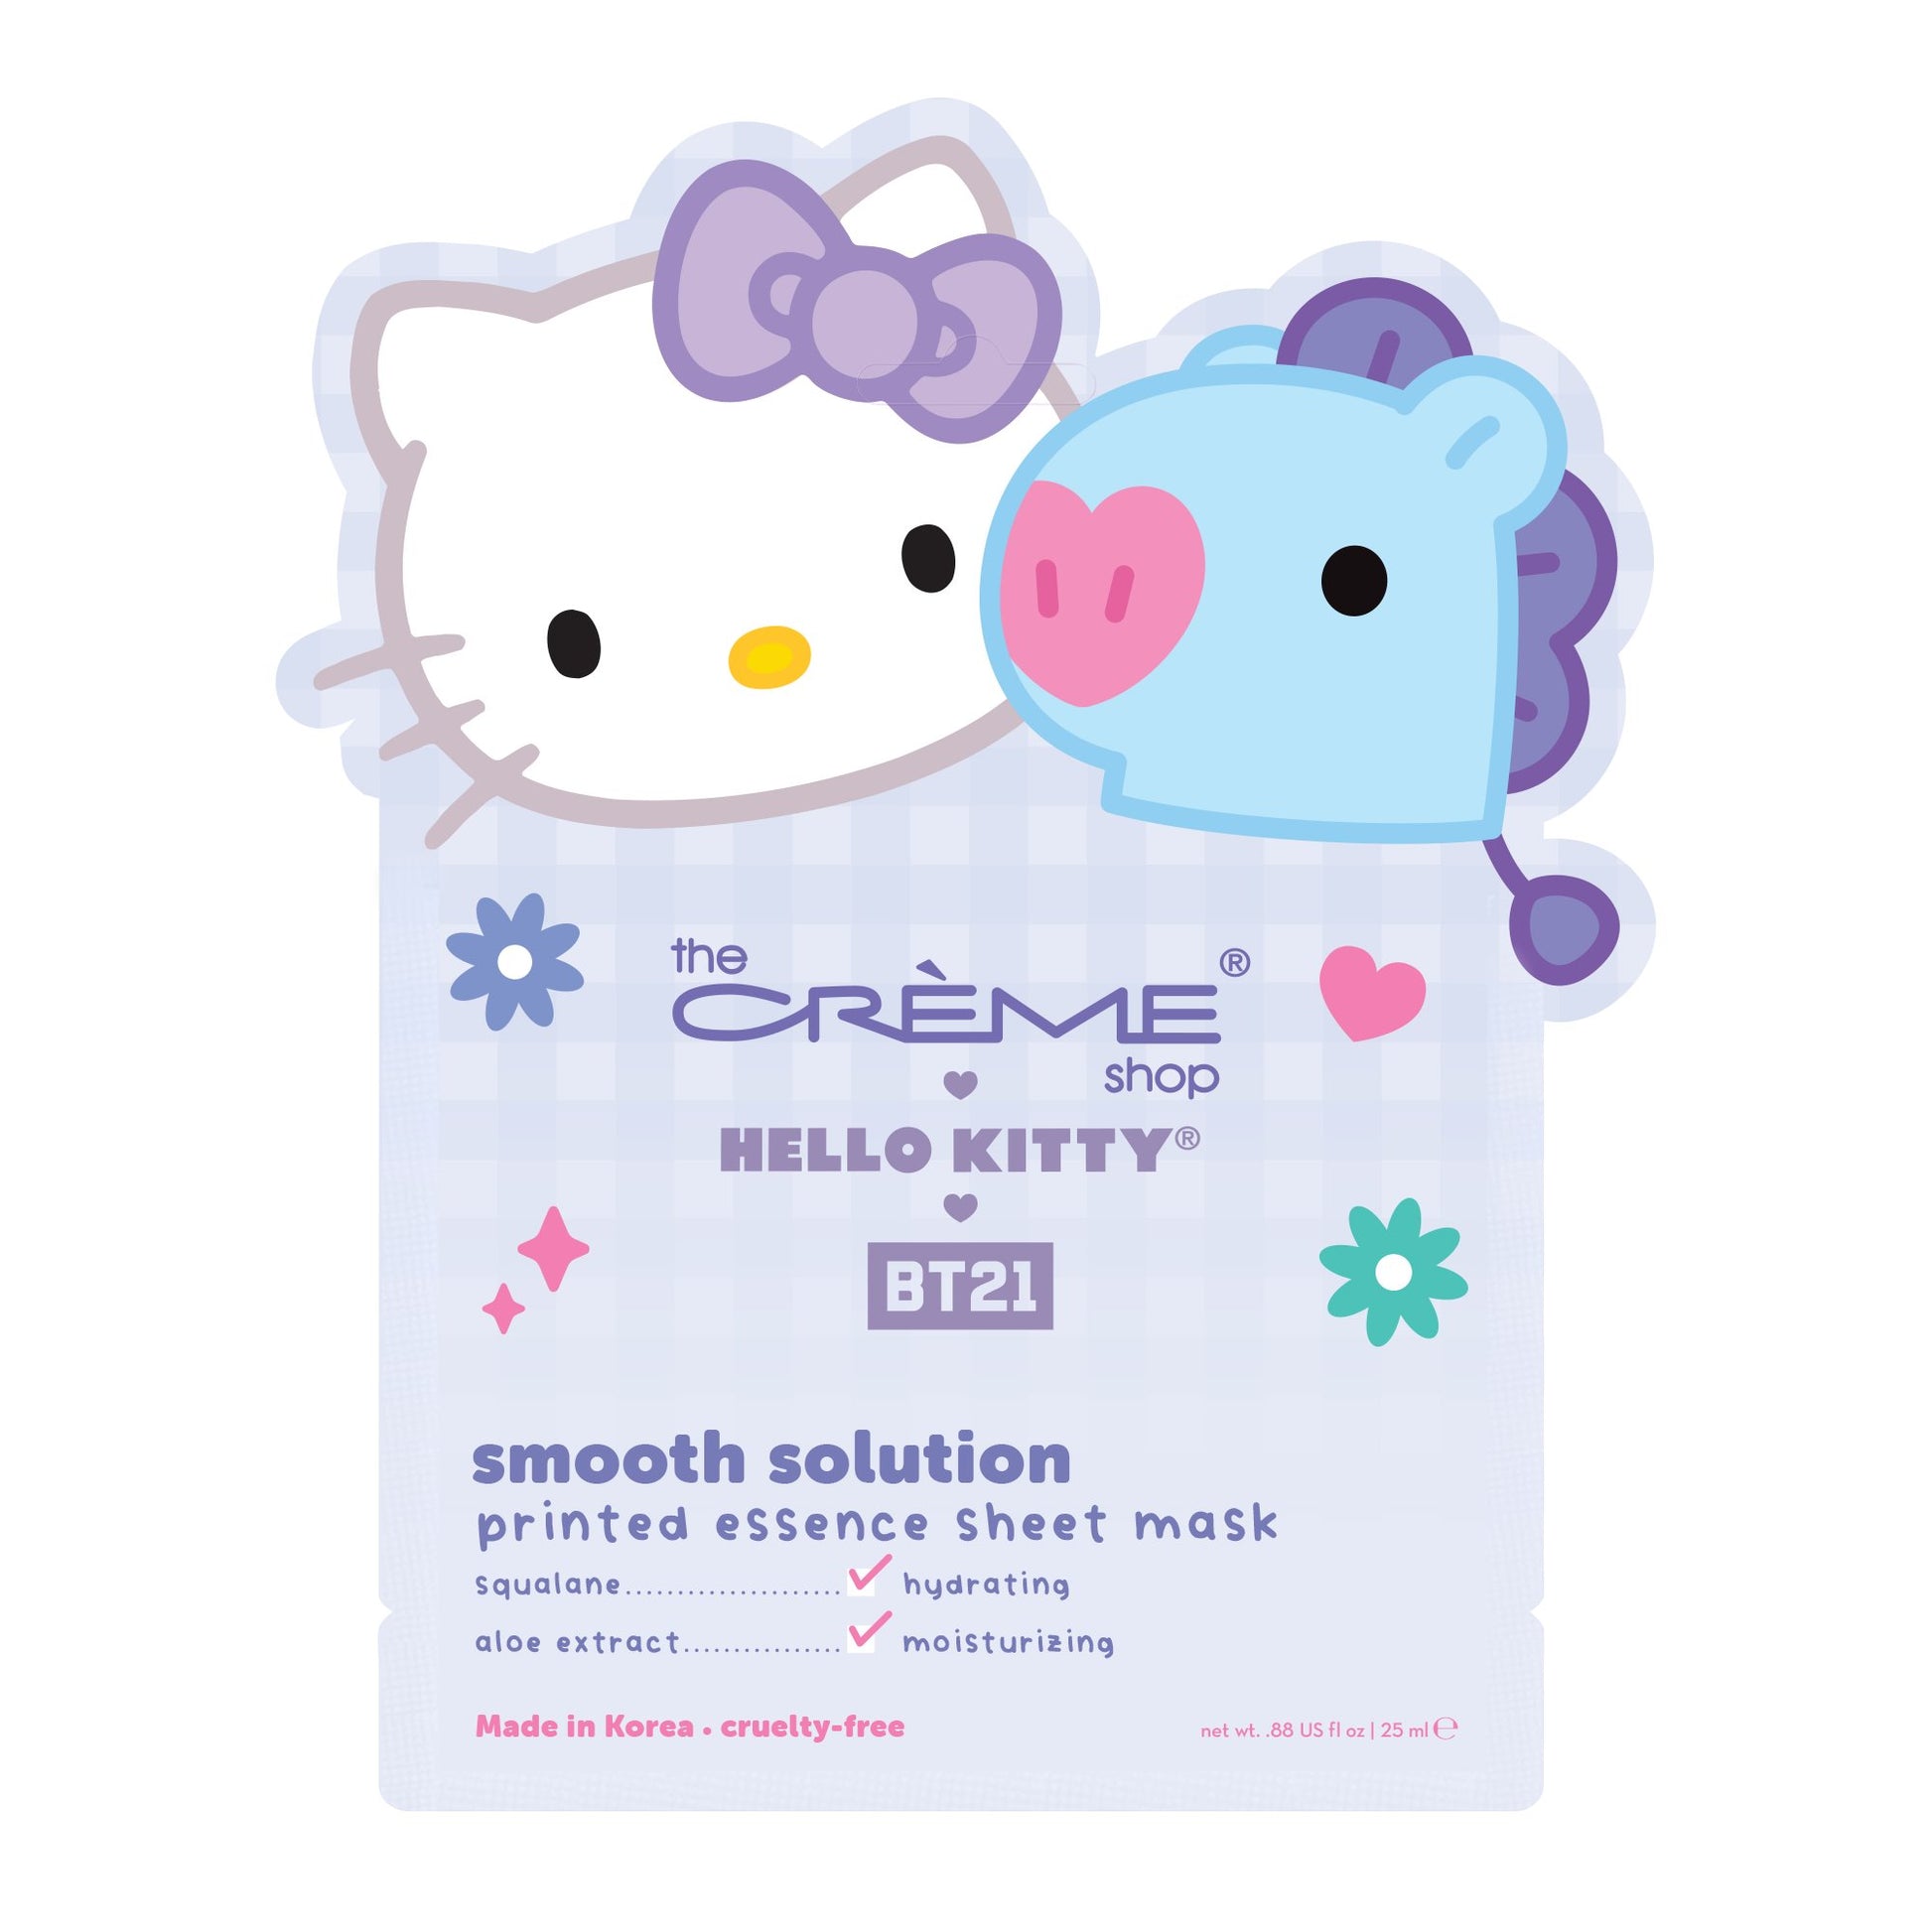 Hydrating and Moisturizing Hello Kitty & BT21 Smooth Solution Printed Essence Sheet Mask, $4